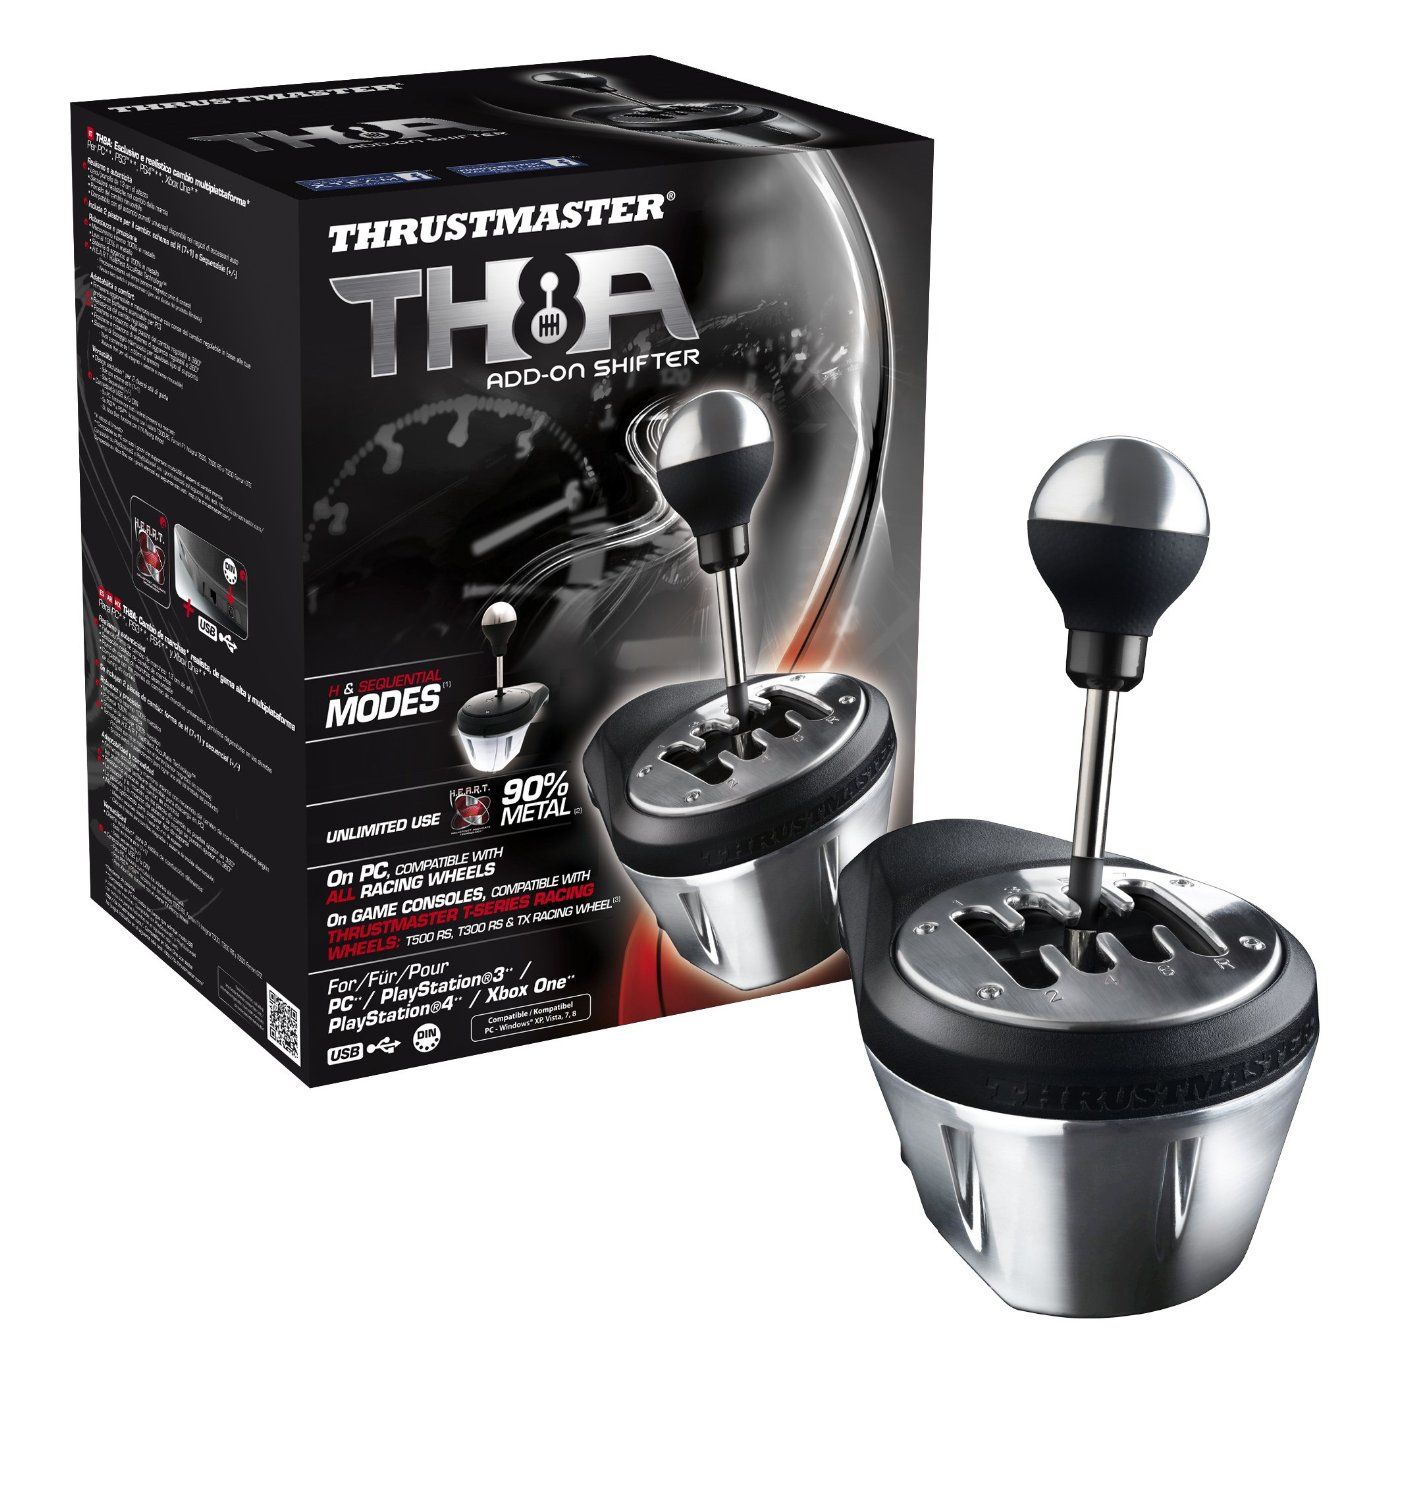 Thrustmaster TH8A Shifter (Add-on for T500/T300/TX)